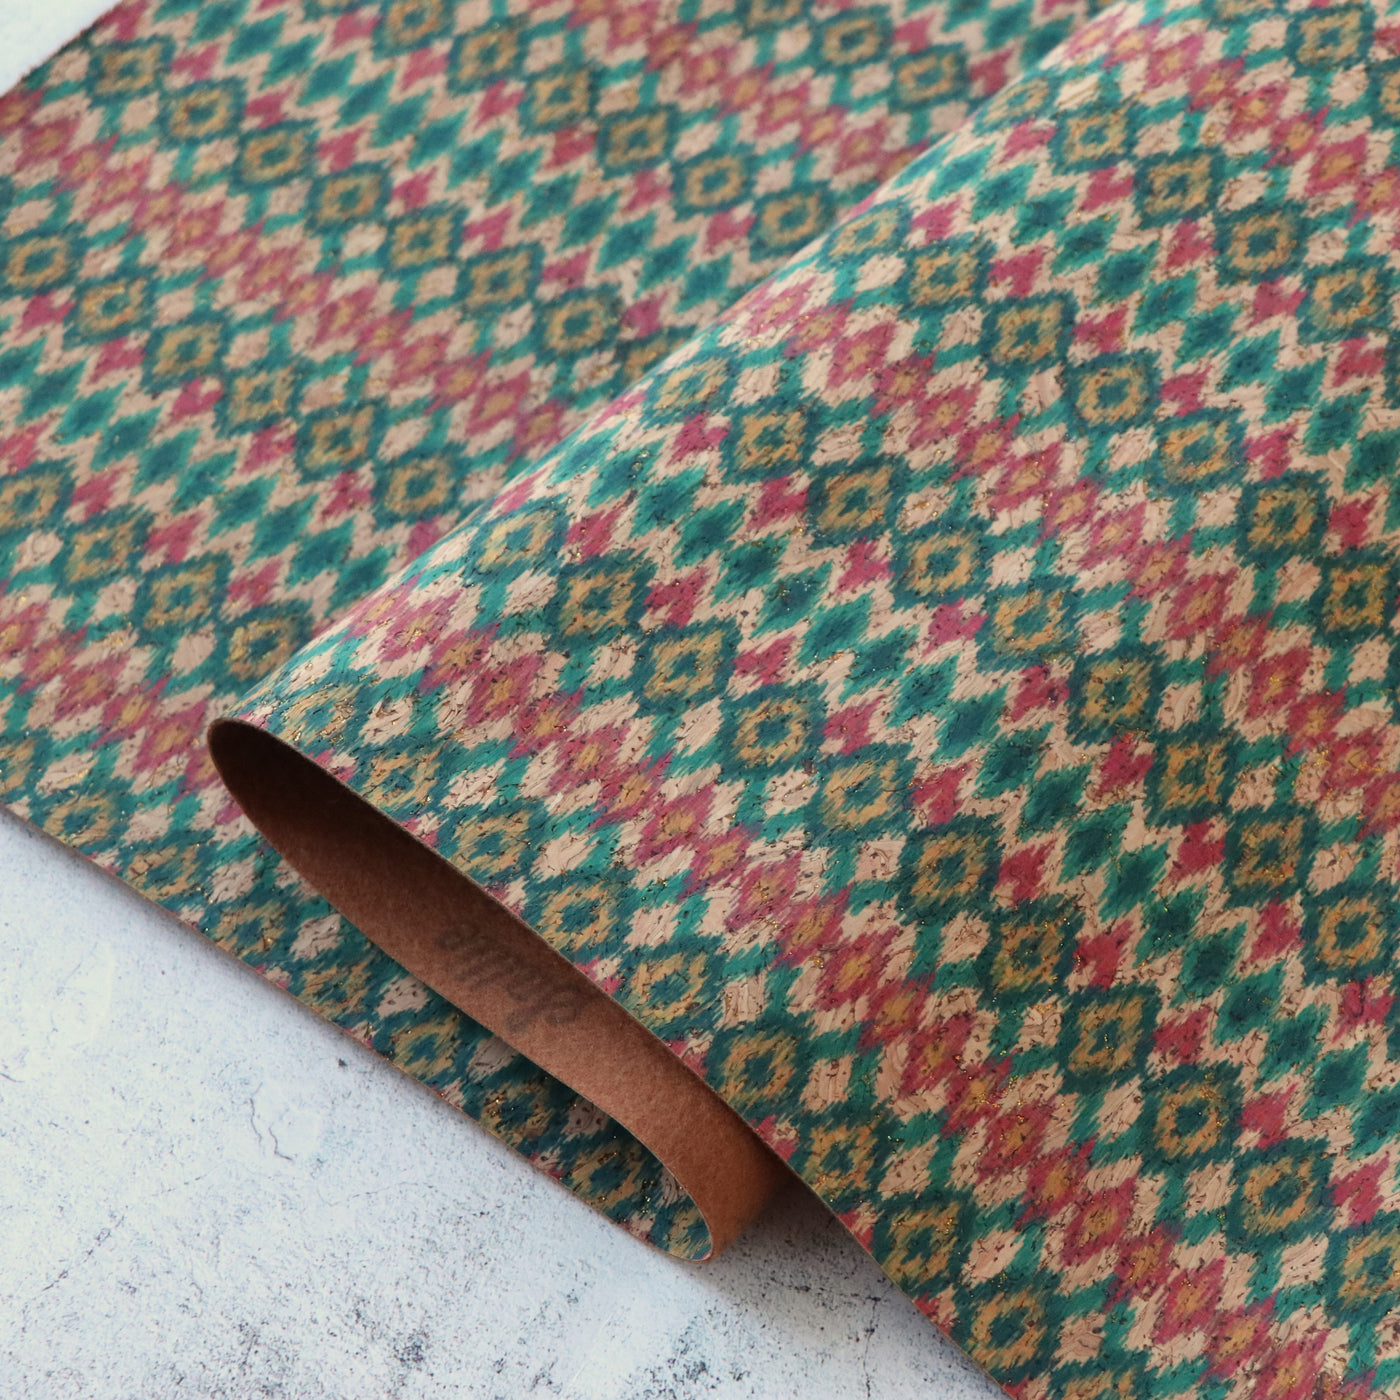 Limited Edition: Tribal Cork Fabric